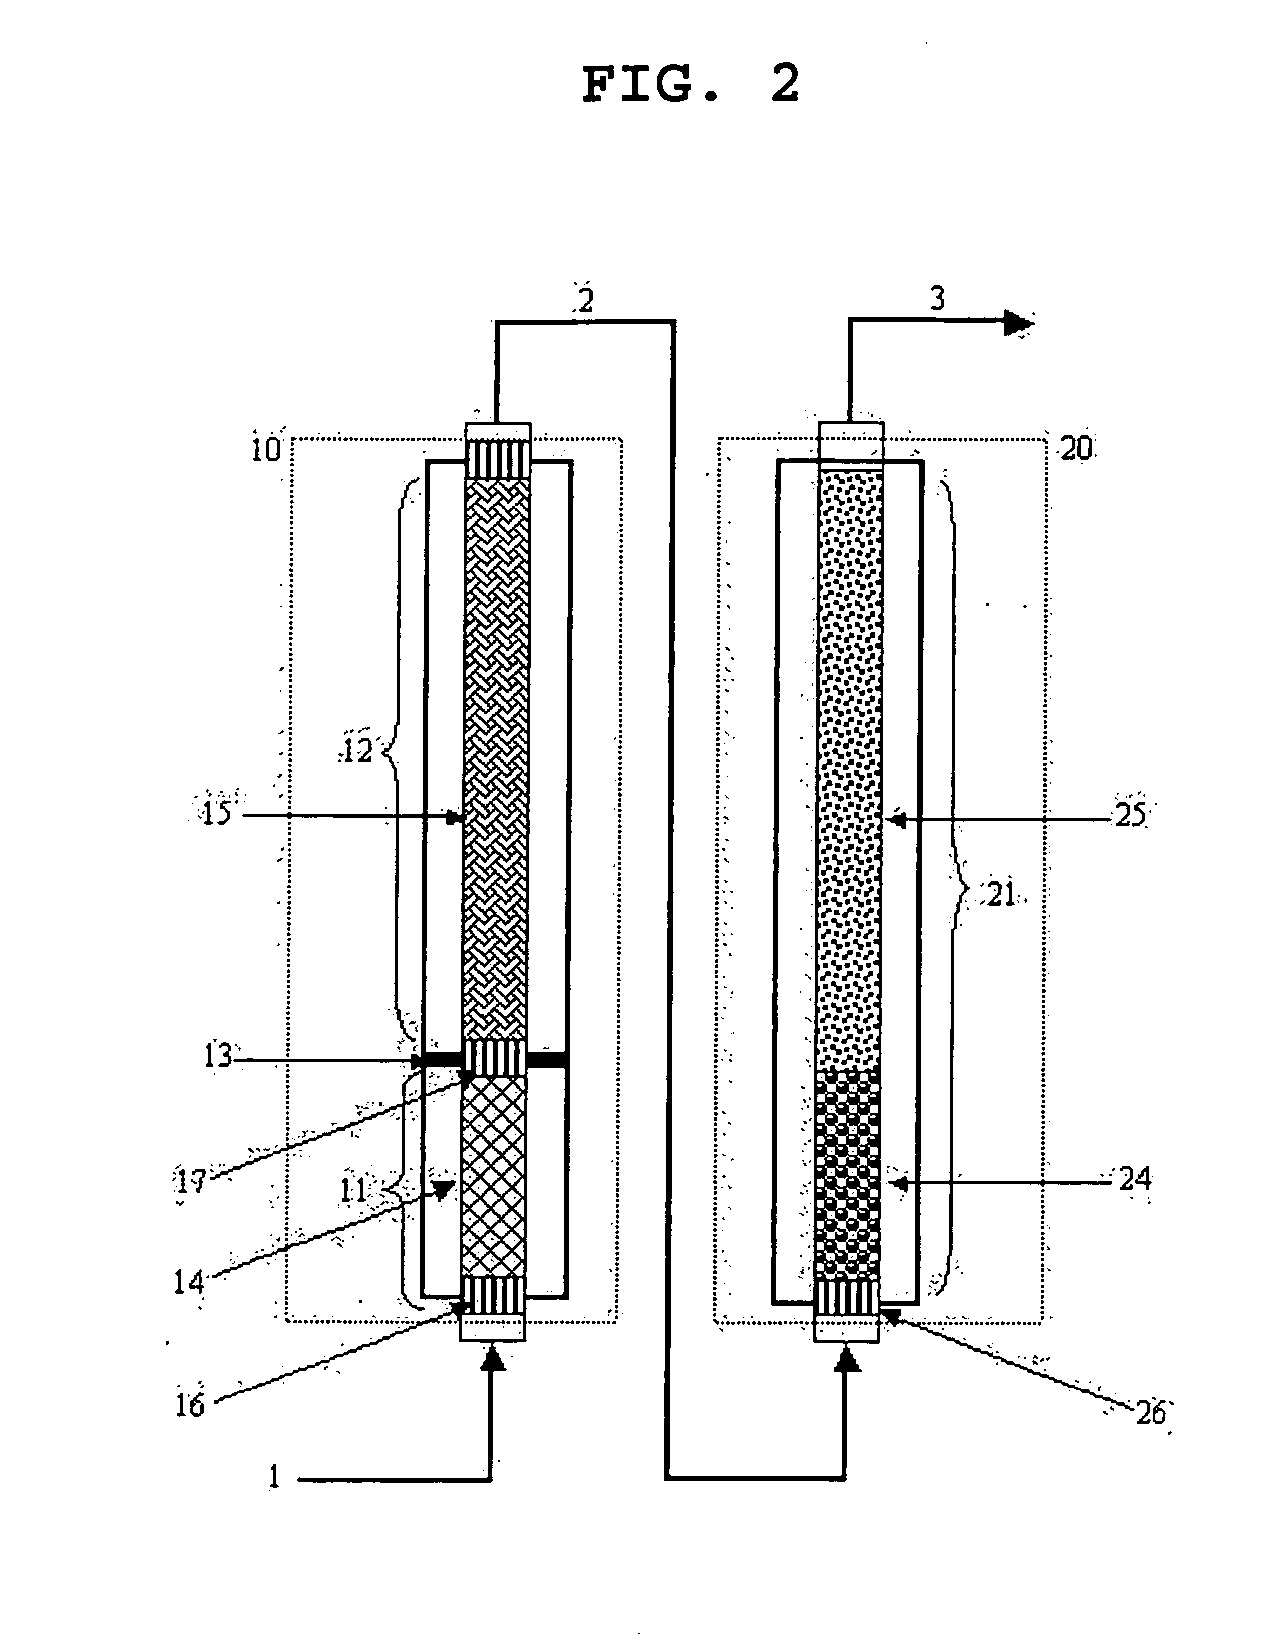 Method of producing unsaturated aldehyde and unsaturated acid in fixed-bed catalytic partial oxidation reactor with enhanced heat control system